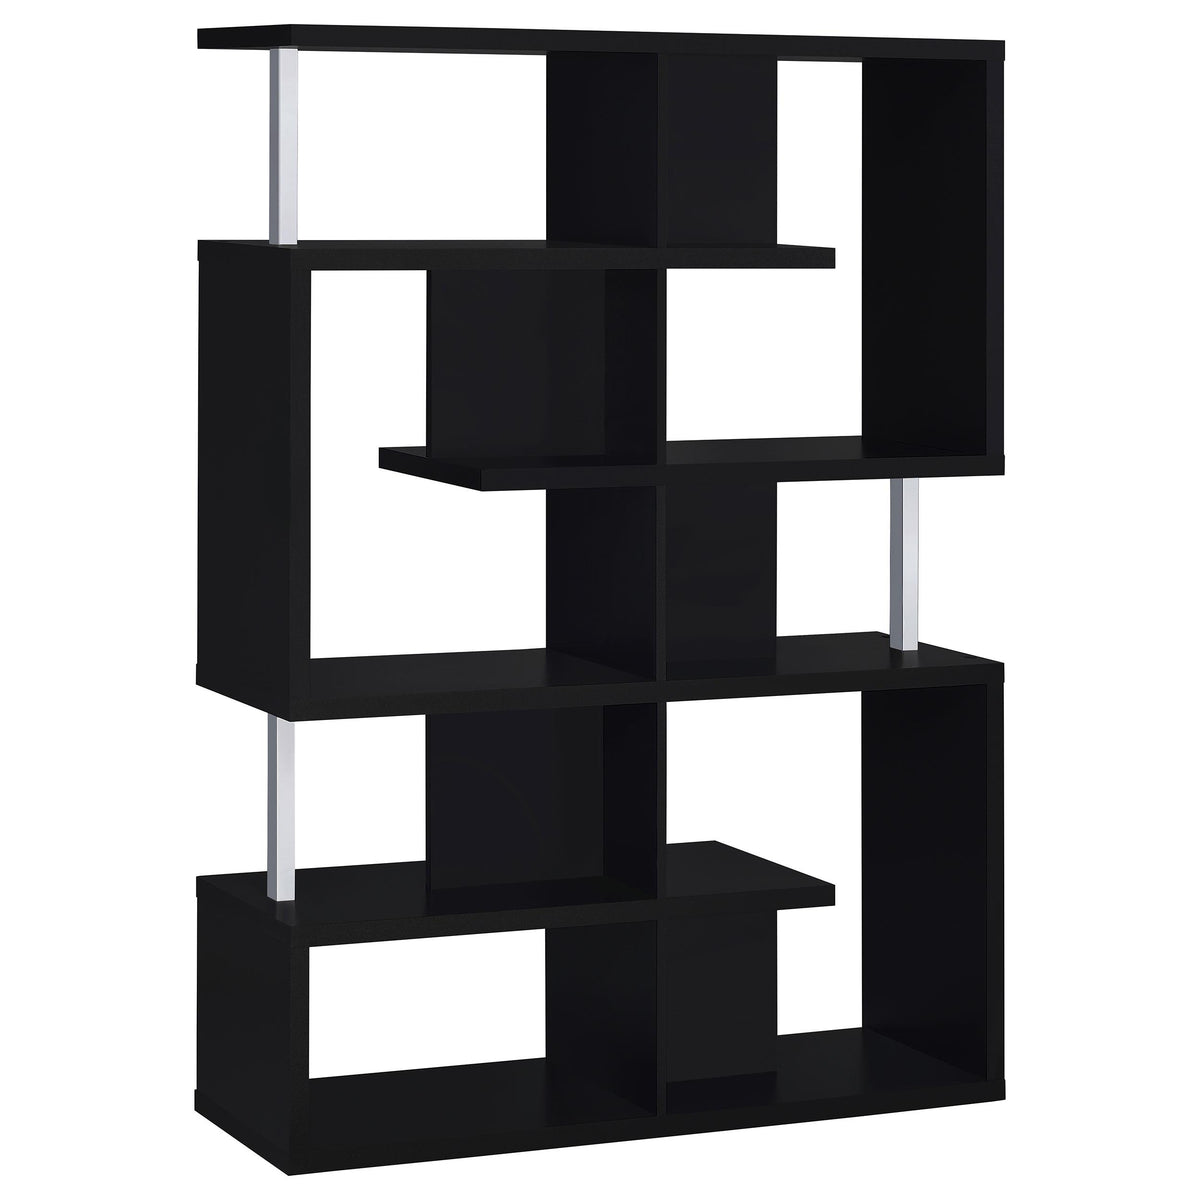 Hoover 5-tier Bookcase Black and Chrome Hoover 5-tier Bookcase Black and Chrome Half Price Furniture